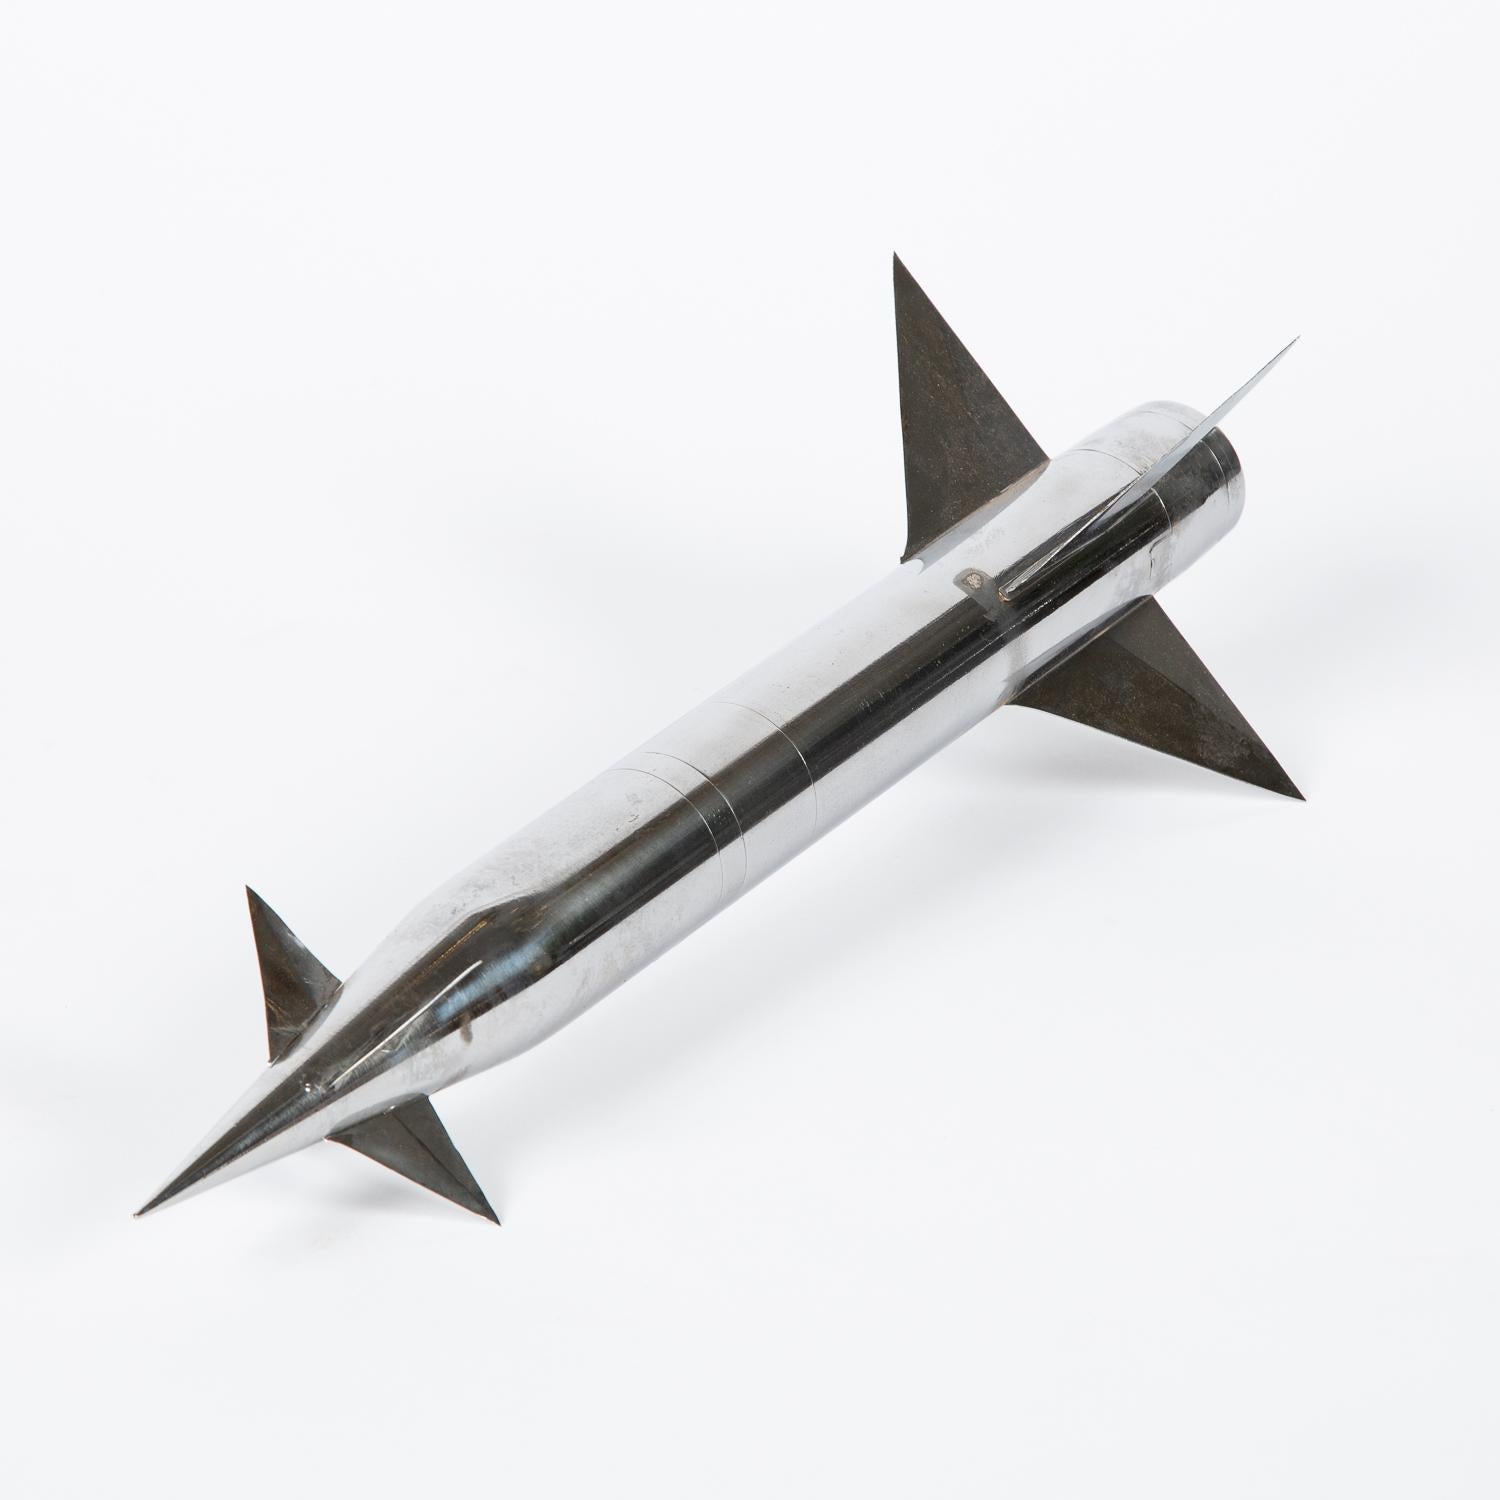 Wind Tunnel Model of a French Sounding Rocket 4